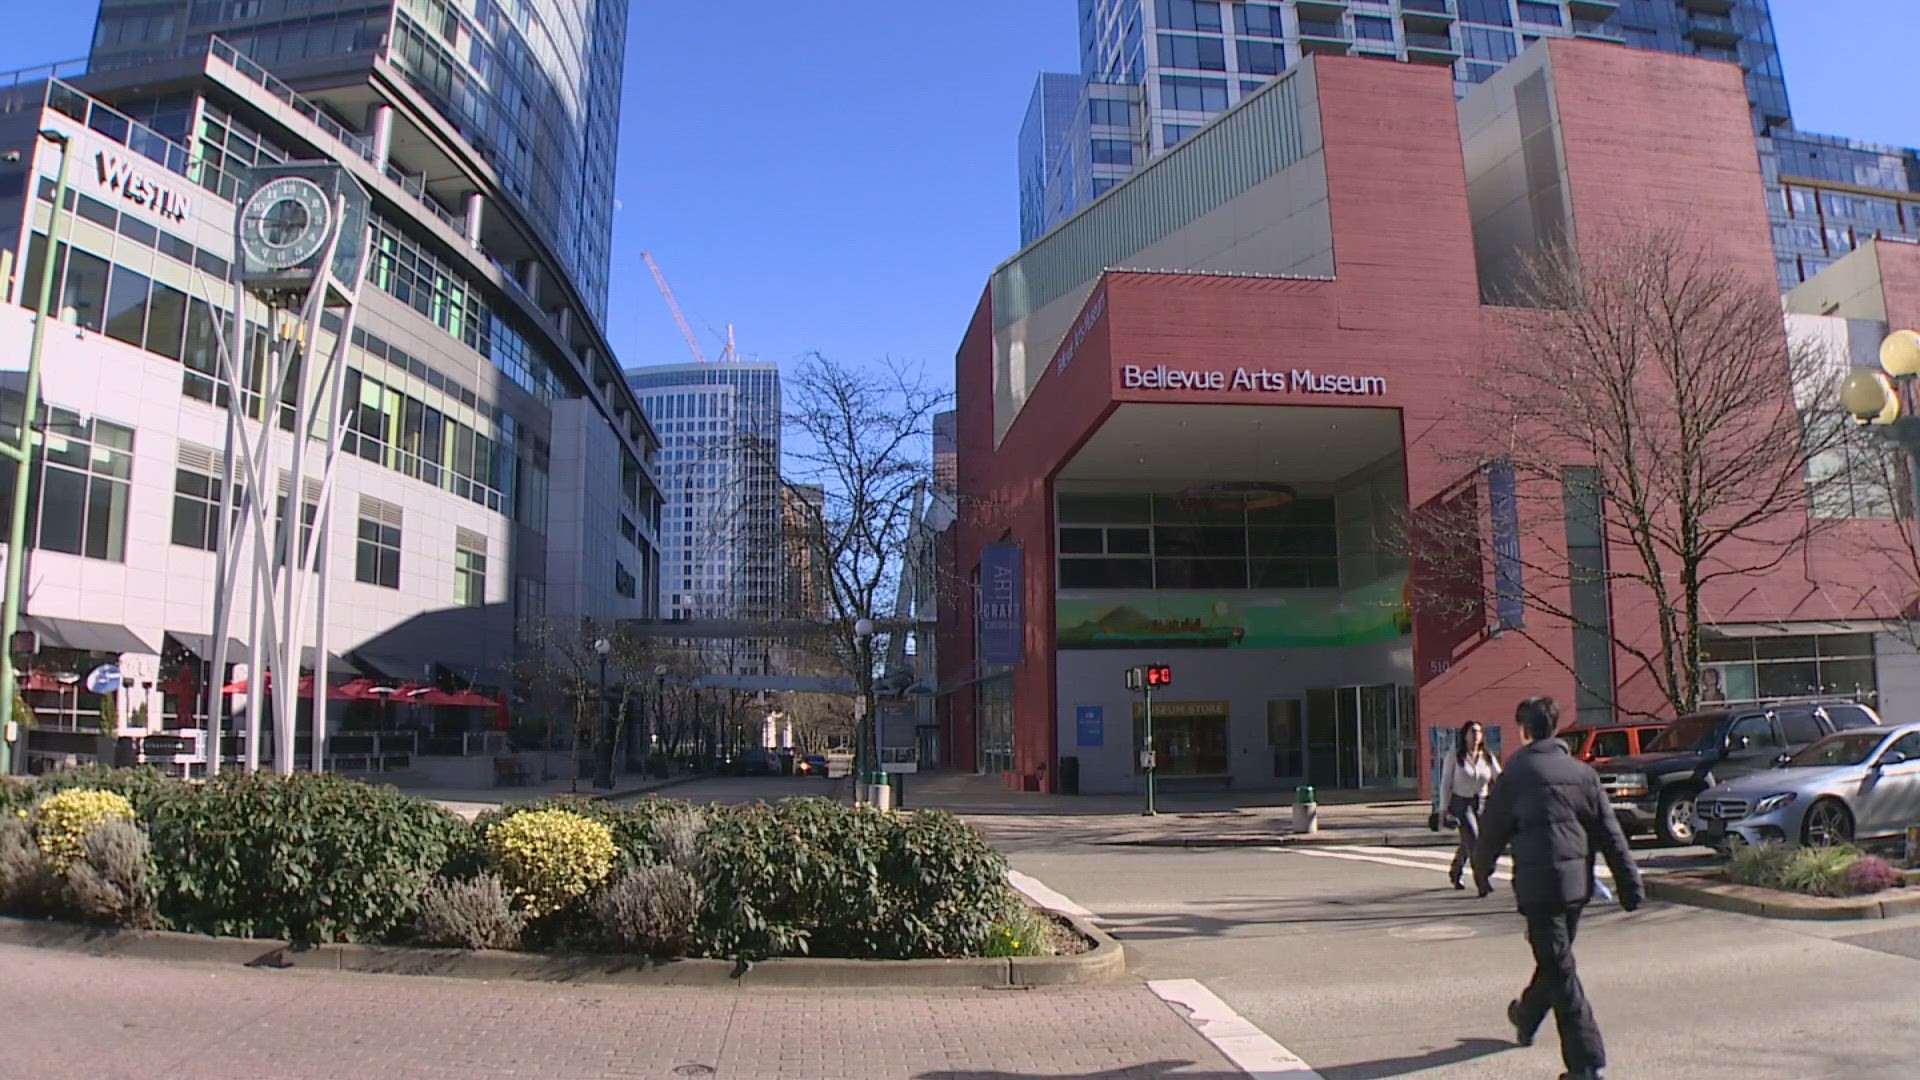 The executive director of the Bellevue Arts Museum says the museum is at risk of closing if it cannot raise $300,000 in the next six weeks.